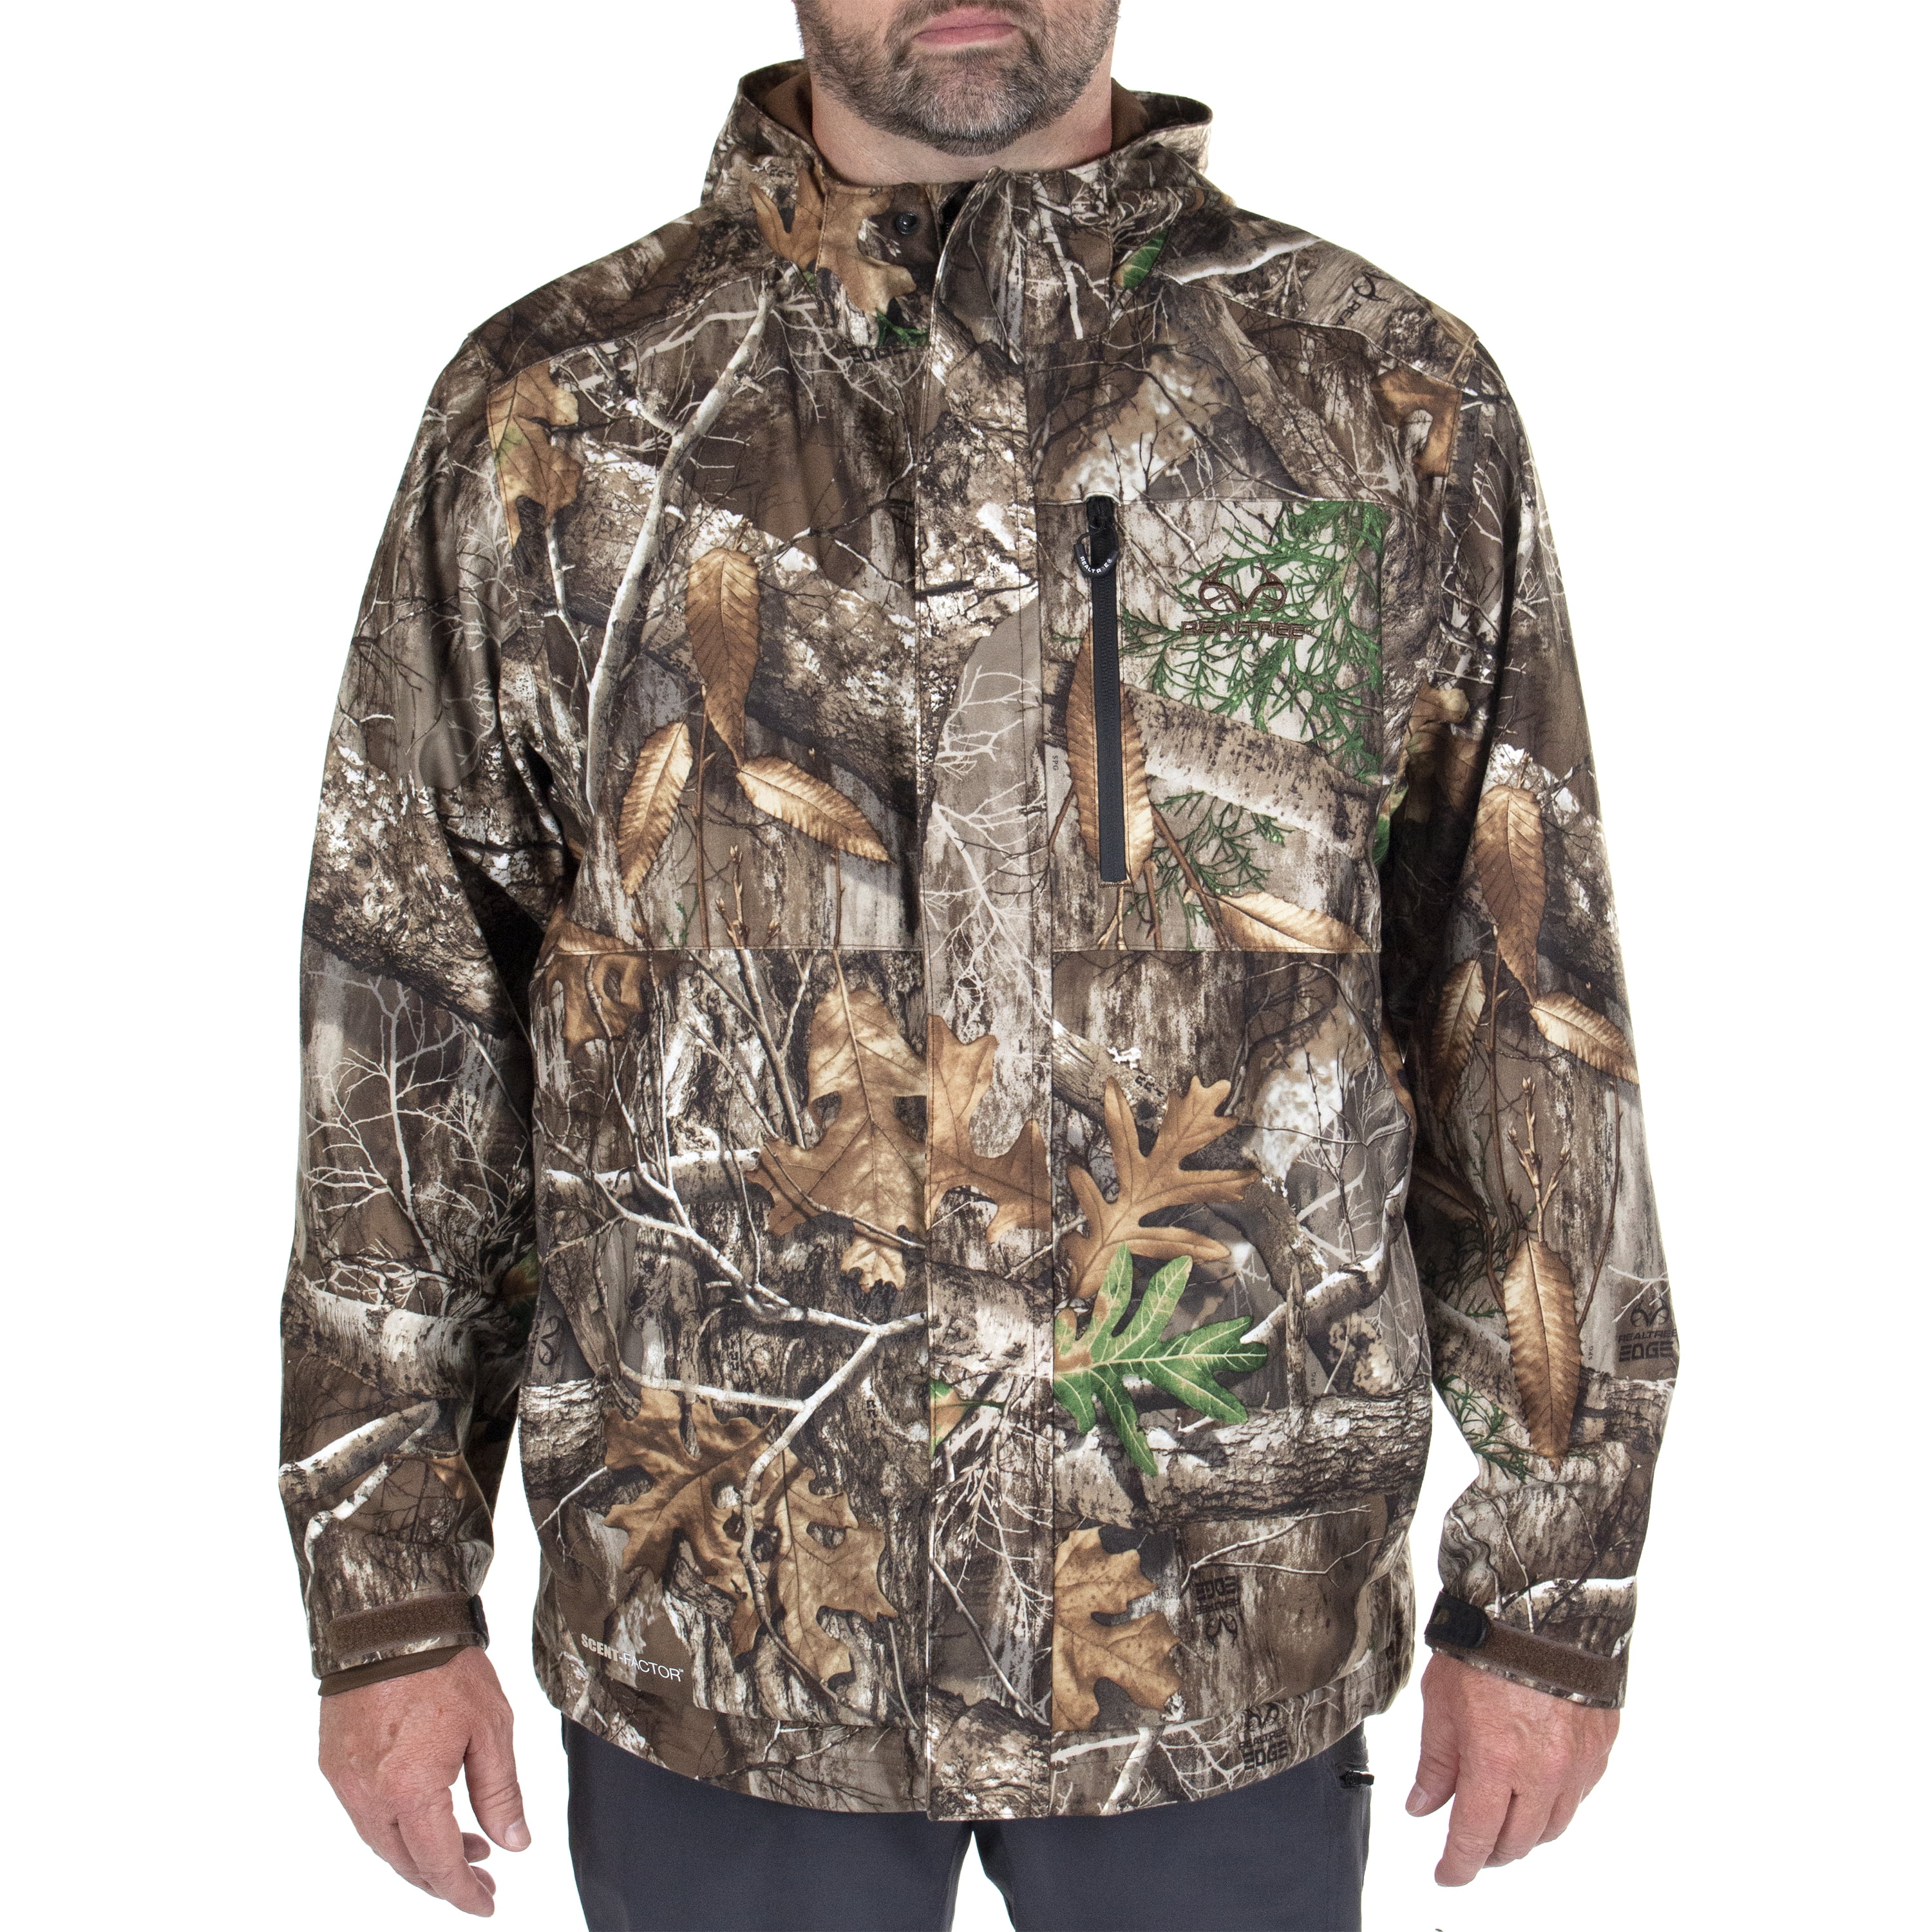 Realtree - Realtree Men&amp;#39;s Scent Control Hunting Jacket, Realtree Edge, Size X-Large